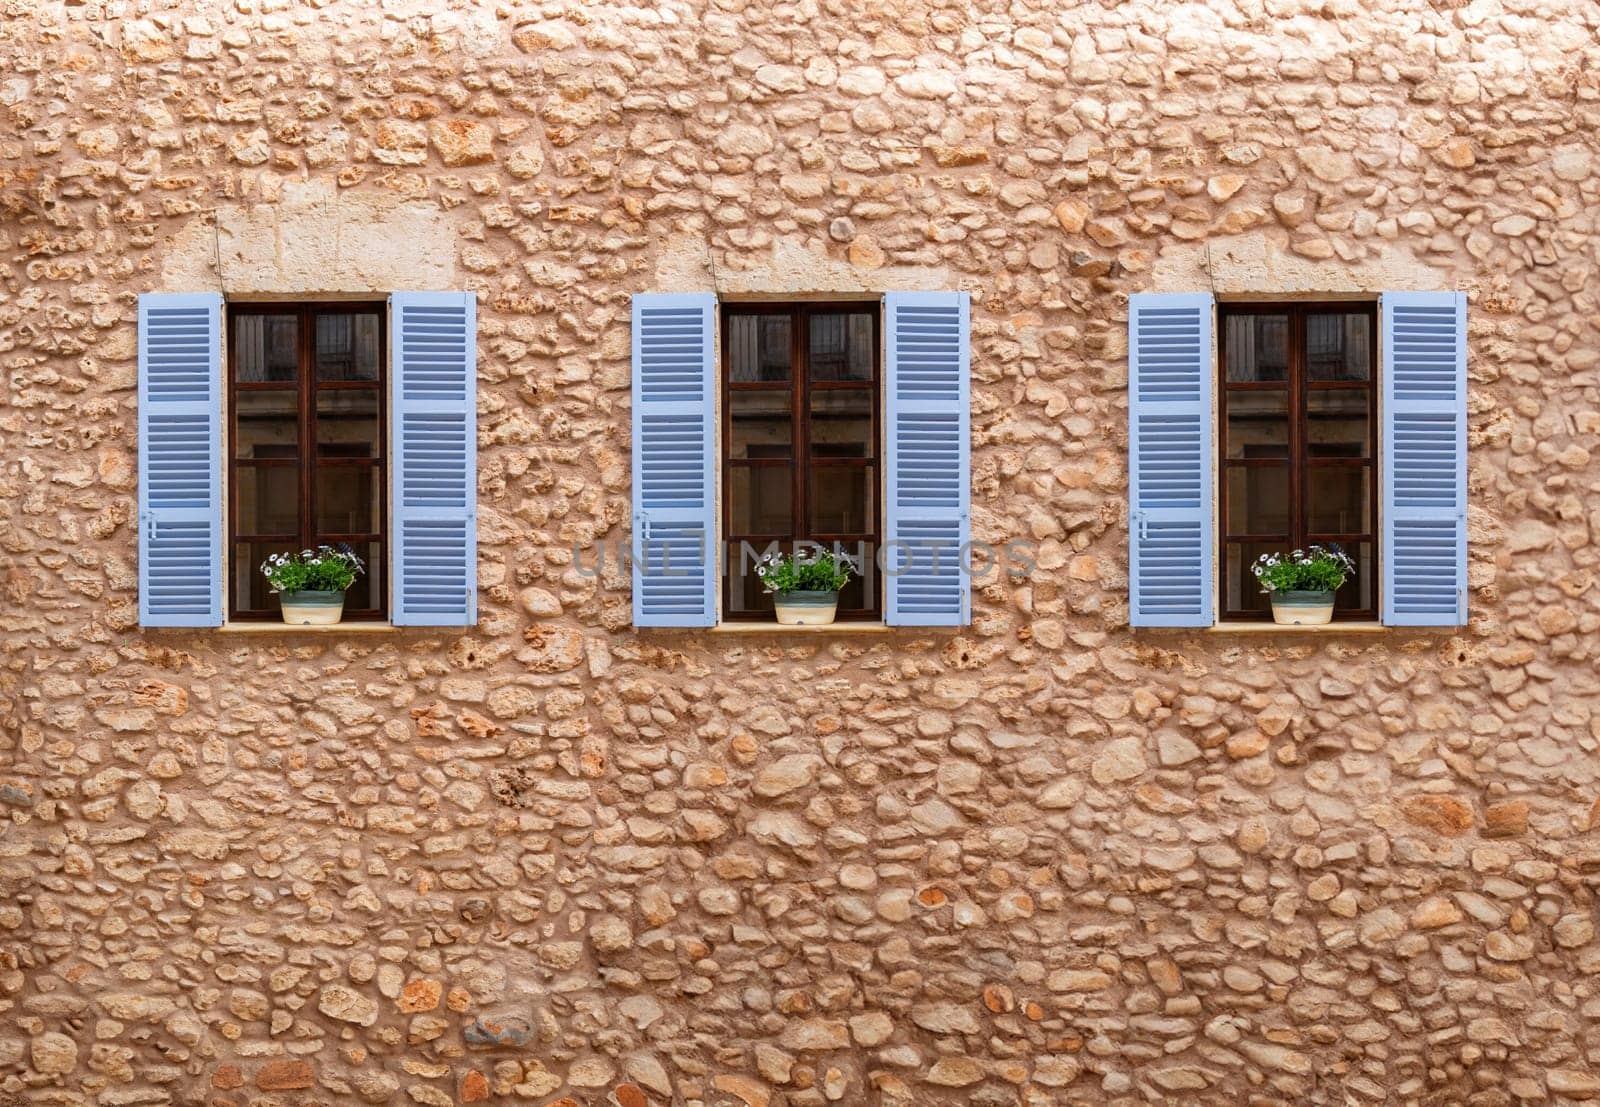 Three windows with blue shutters and white flower boxes on a rustic stone wall.